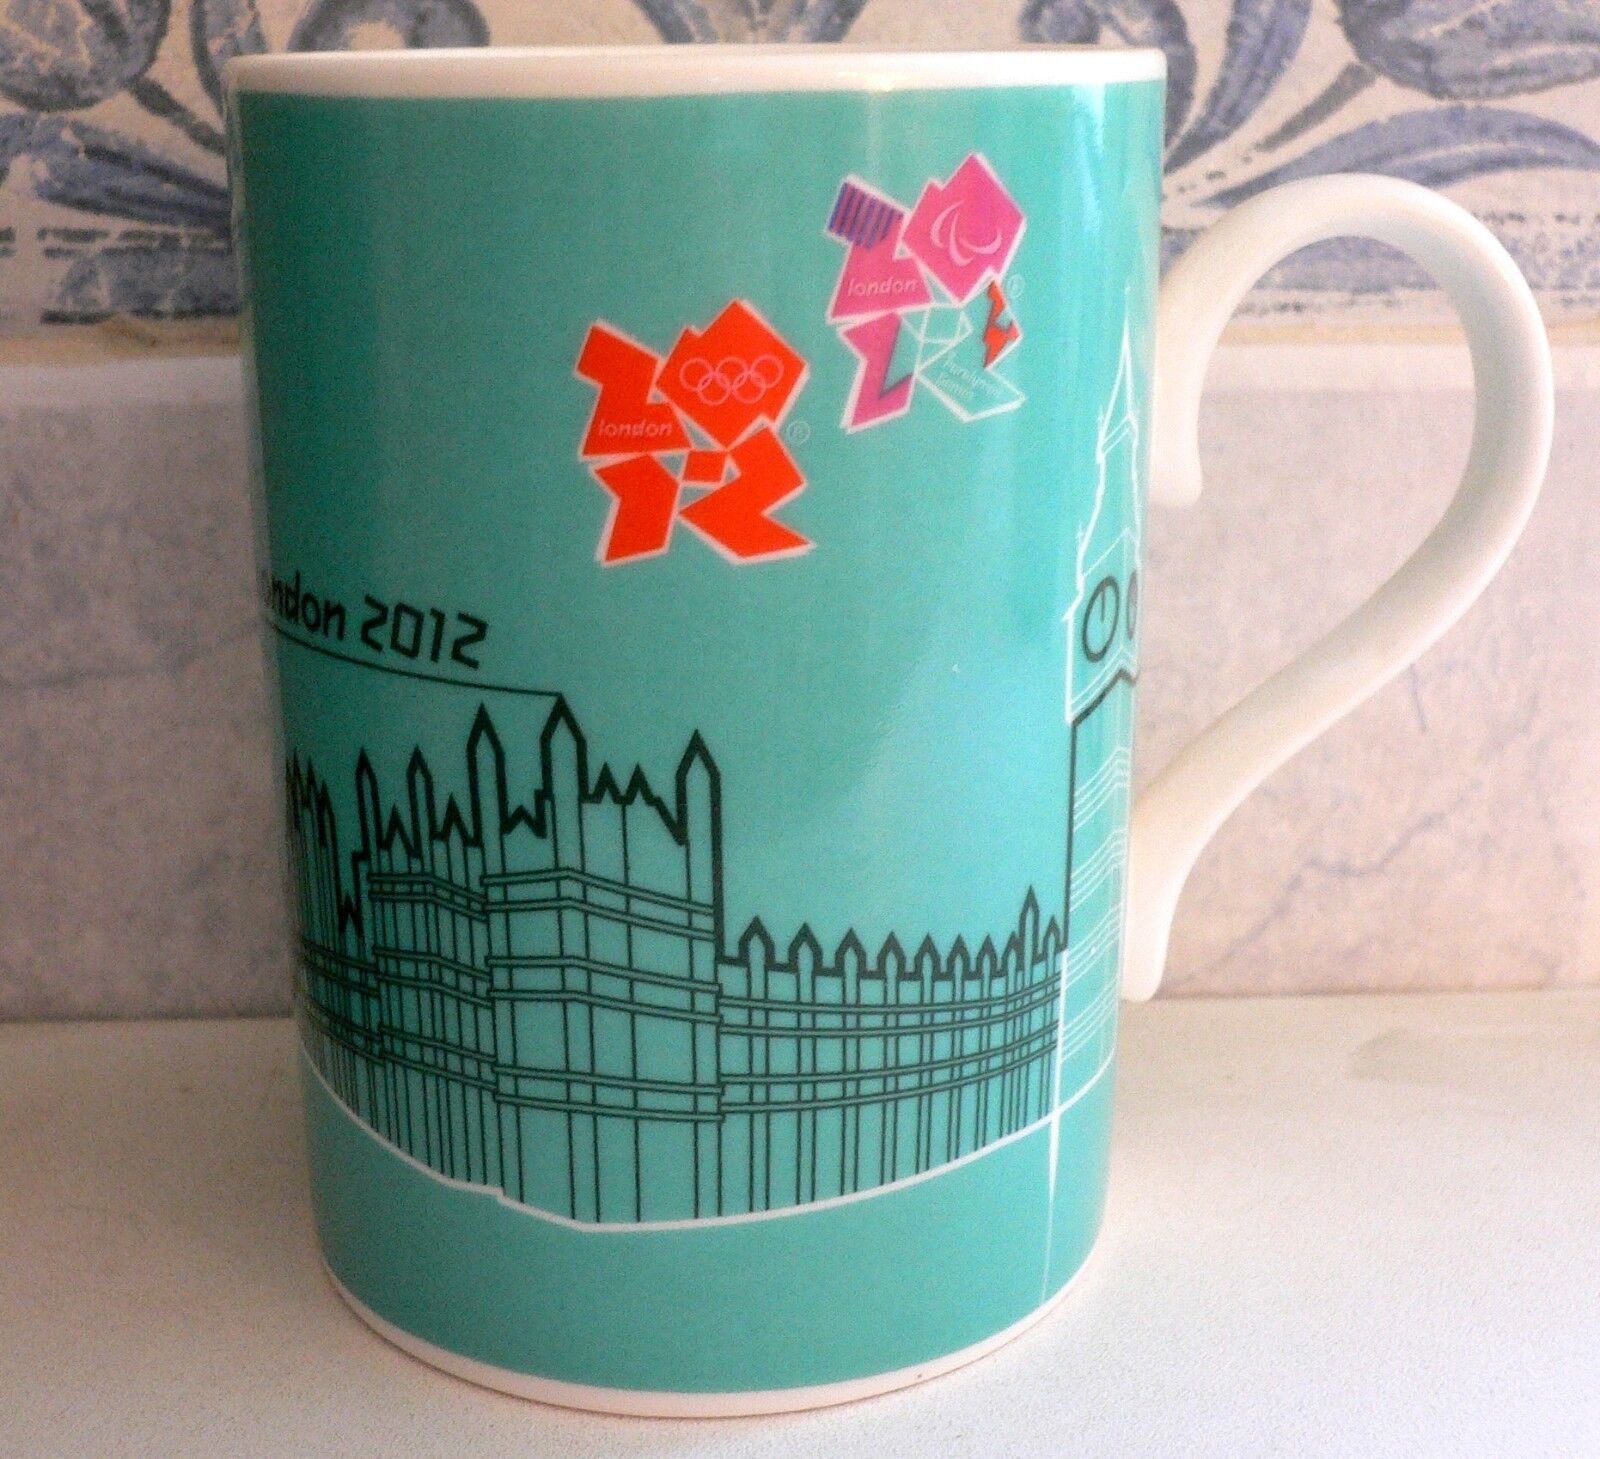 London 2012 Olympic Games ROYAL DOULTON Official Product of London 2012 Mug Cup